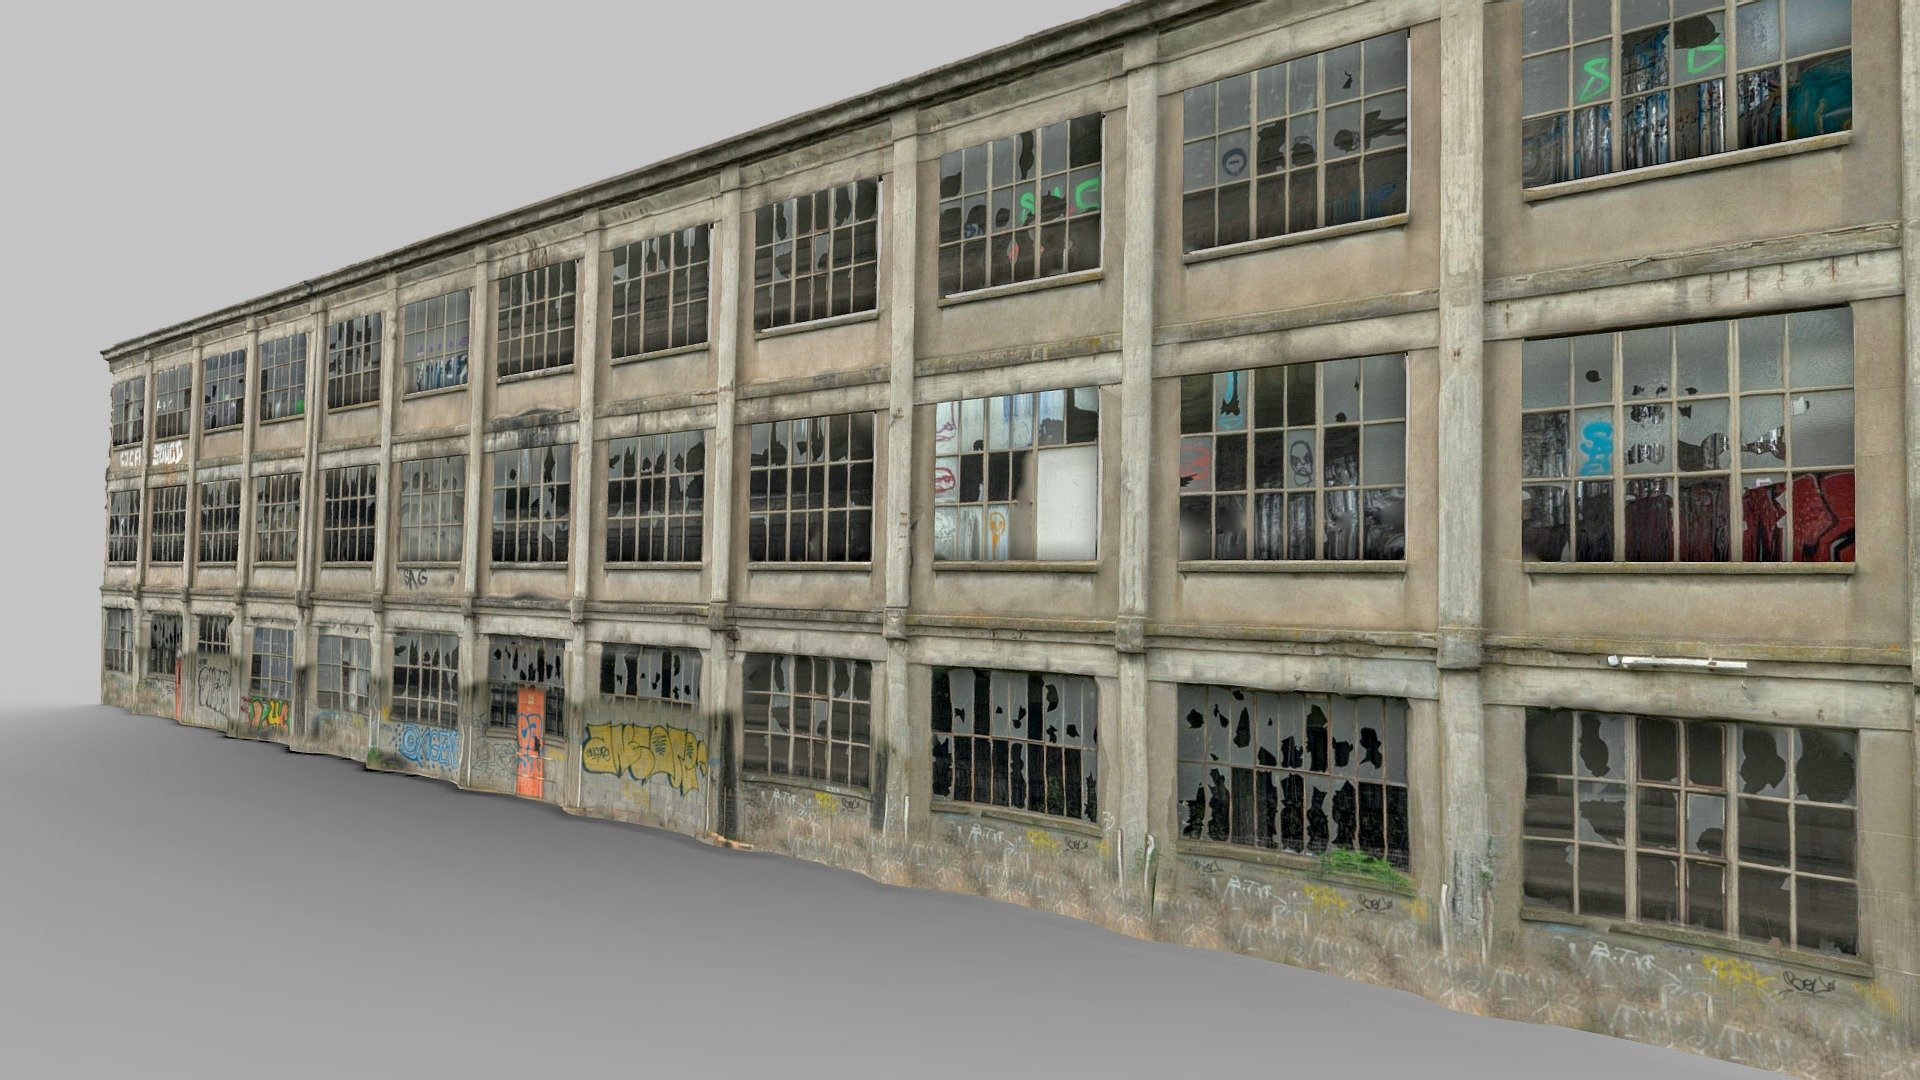 Building scan No. 7
Magasin général de Saint-Pierre-des-Corps

from 240mm photoshoot 100 meters aways

Urban &amp; Industrial collections

Good for adding realism to your urban / abandoned scenes - Building scan No. 7 - Buy Royalty Free 3D model by 3Dystopia (@Dystopia) 3d model